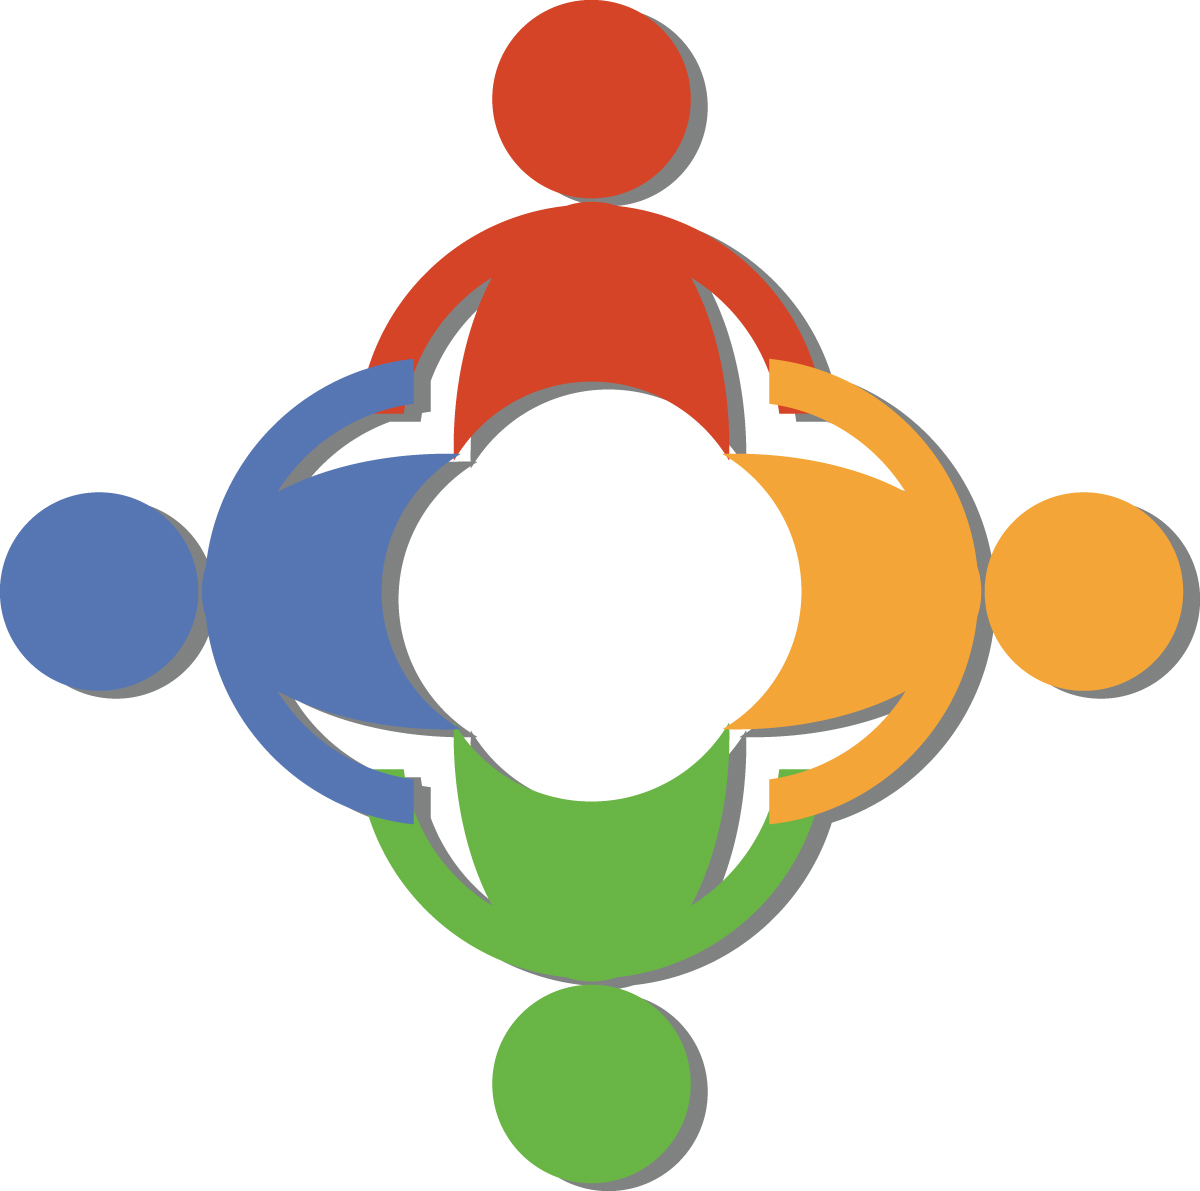 Free Teamwork Clip Art Of A Circle Of Diverse People Holding Hands